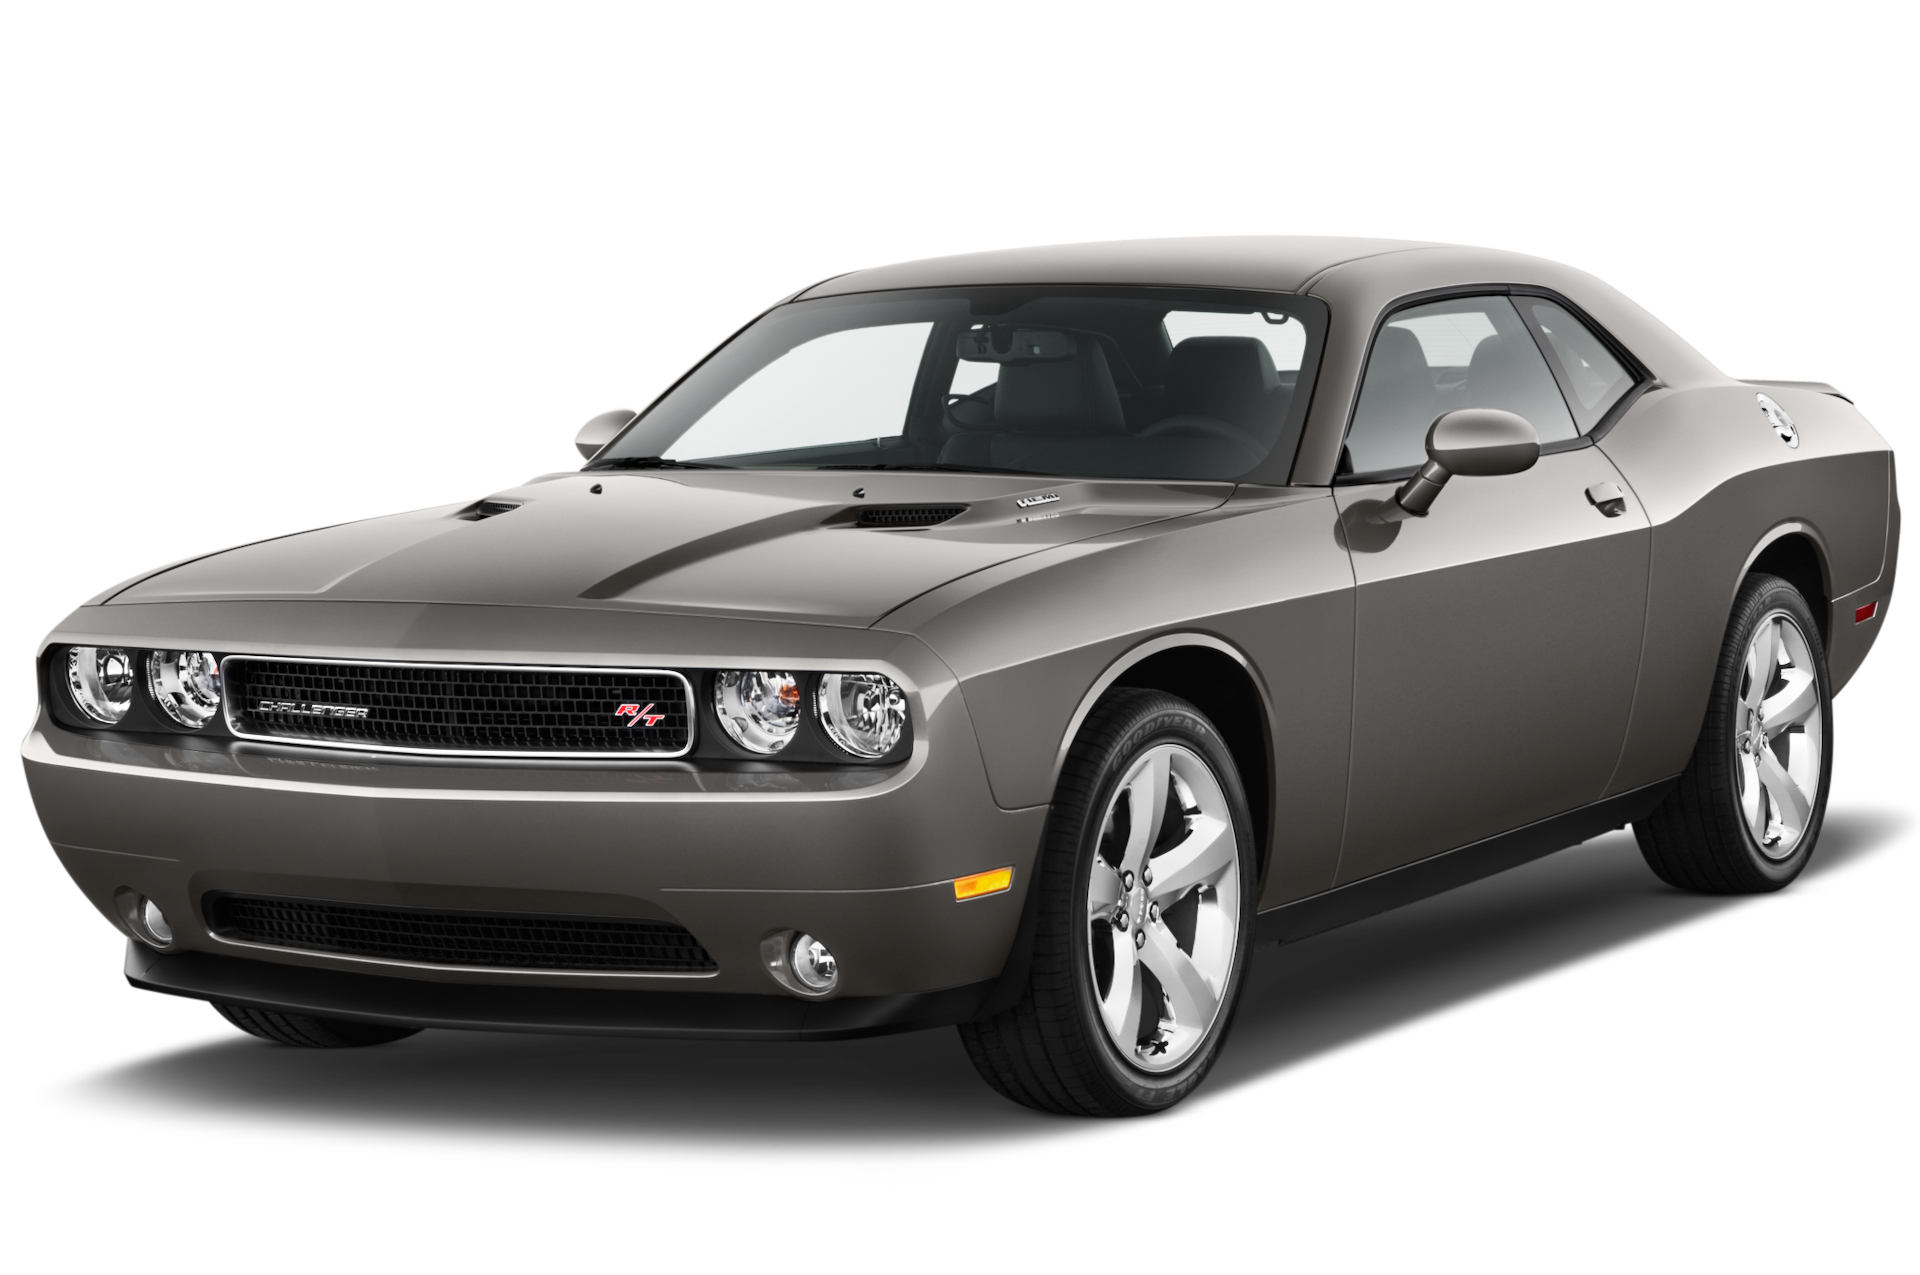 2014 Dodge Challenger Prices, Reviews, and Photos - MotorTrend